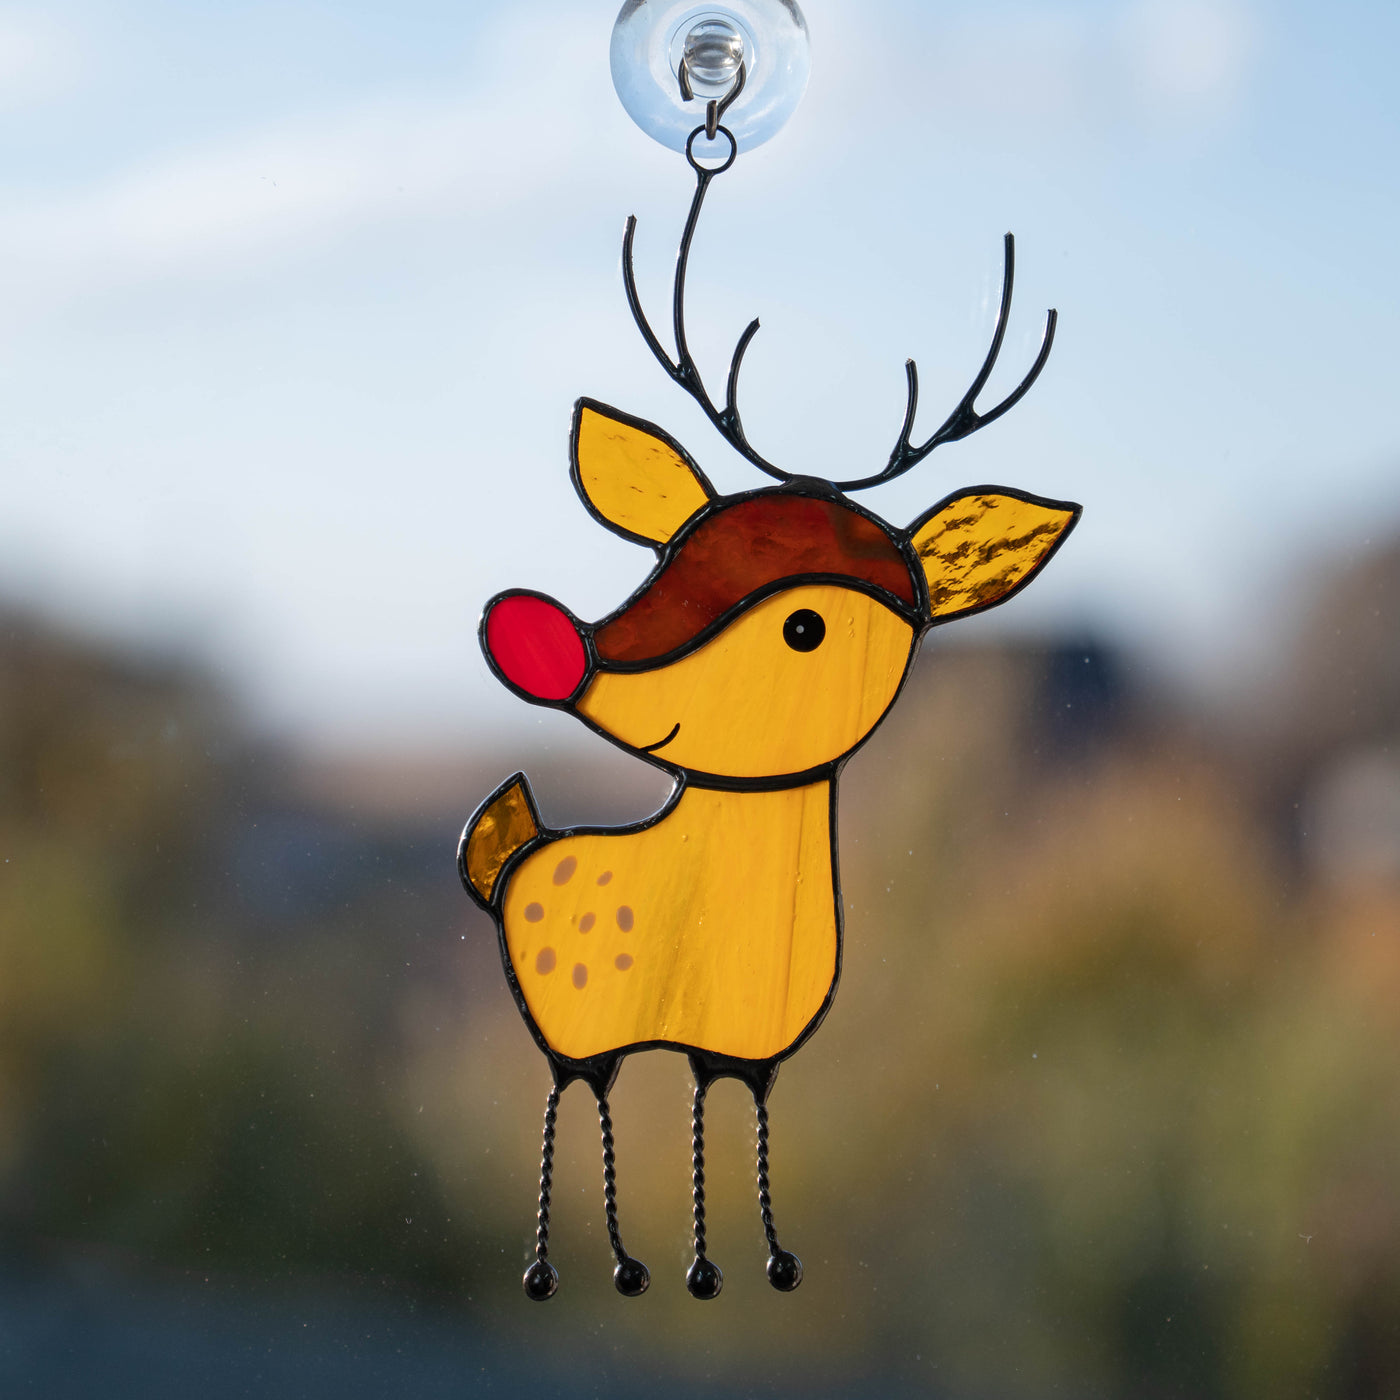 Stained glass reindeer suncatcher for New Year celebrations